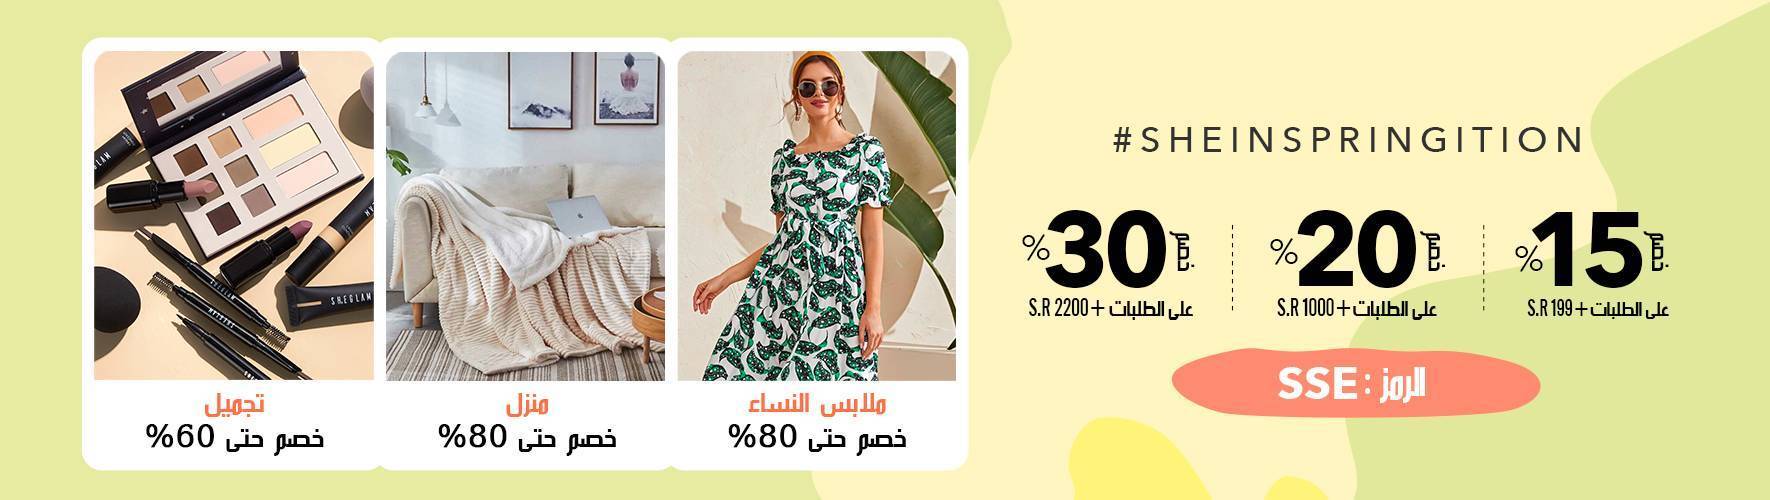 Shein Coupon Up To 30% OFF + Up To 80% OFF Sale | Shein KSA 4